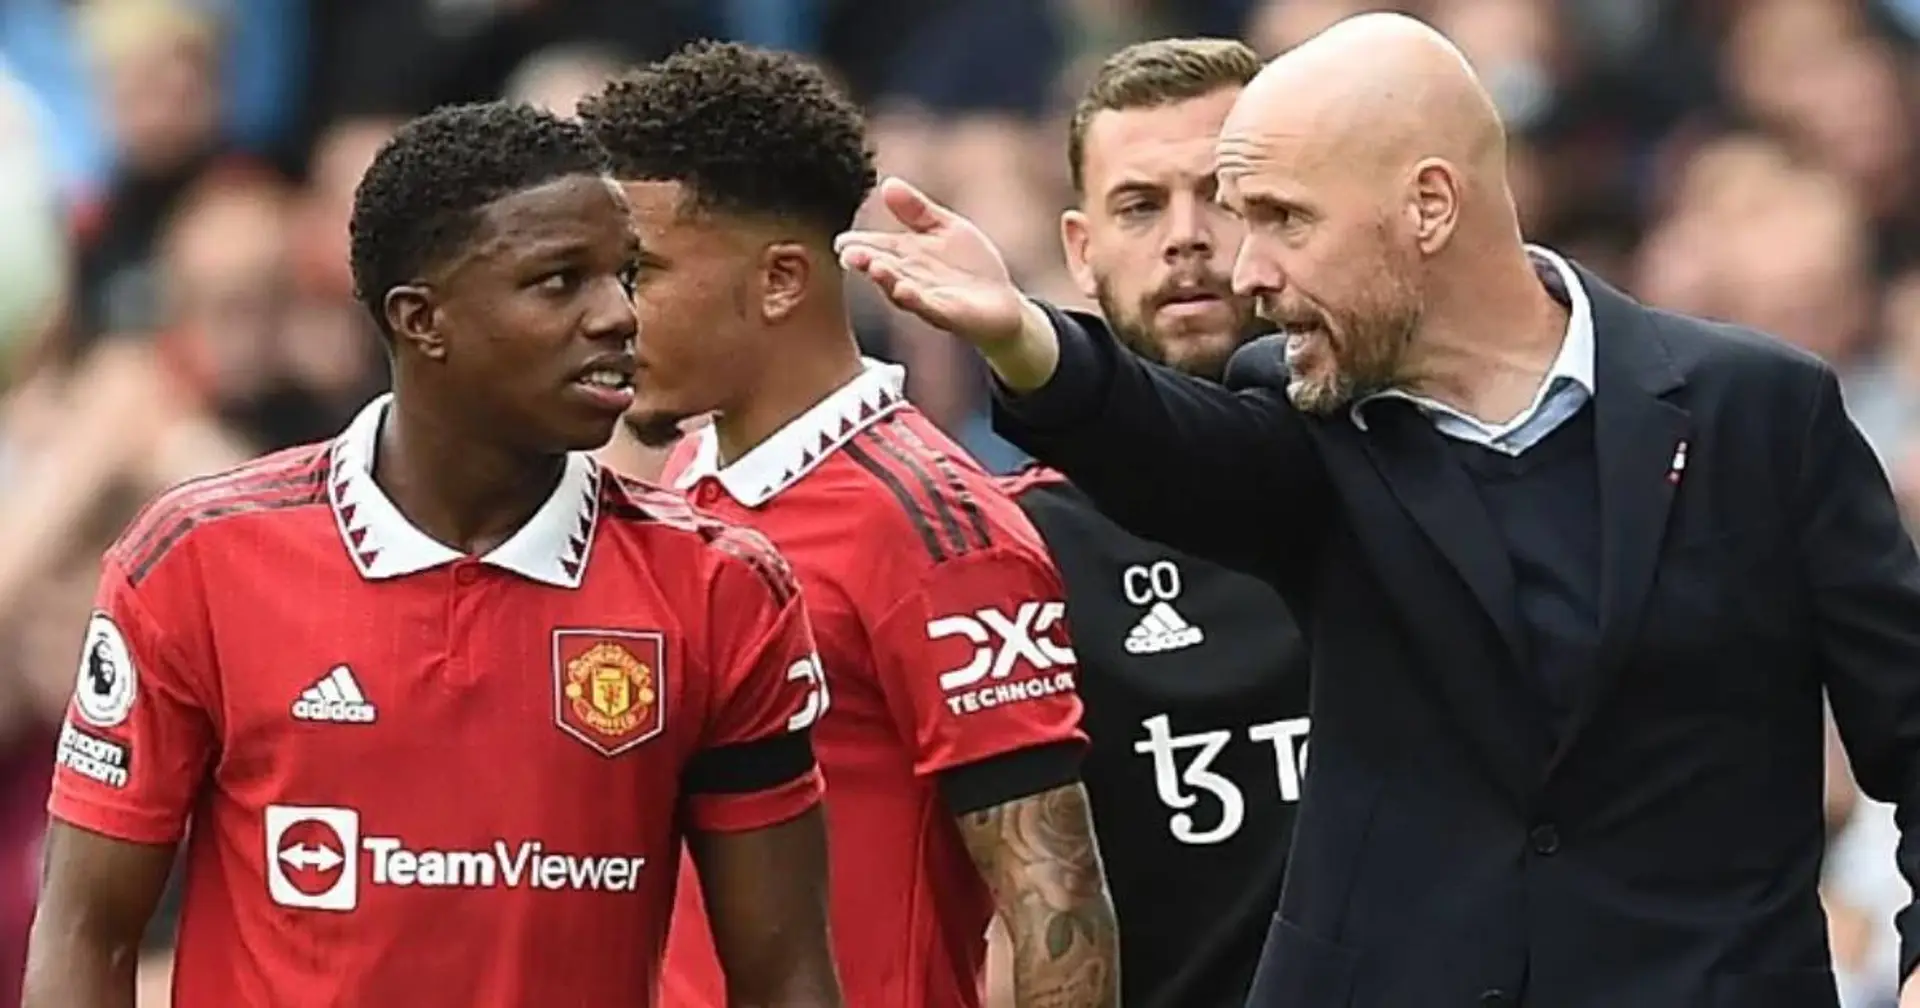 Ten Hag 'frustrated' with Man United medics as Malacia ruled out for rest of season